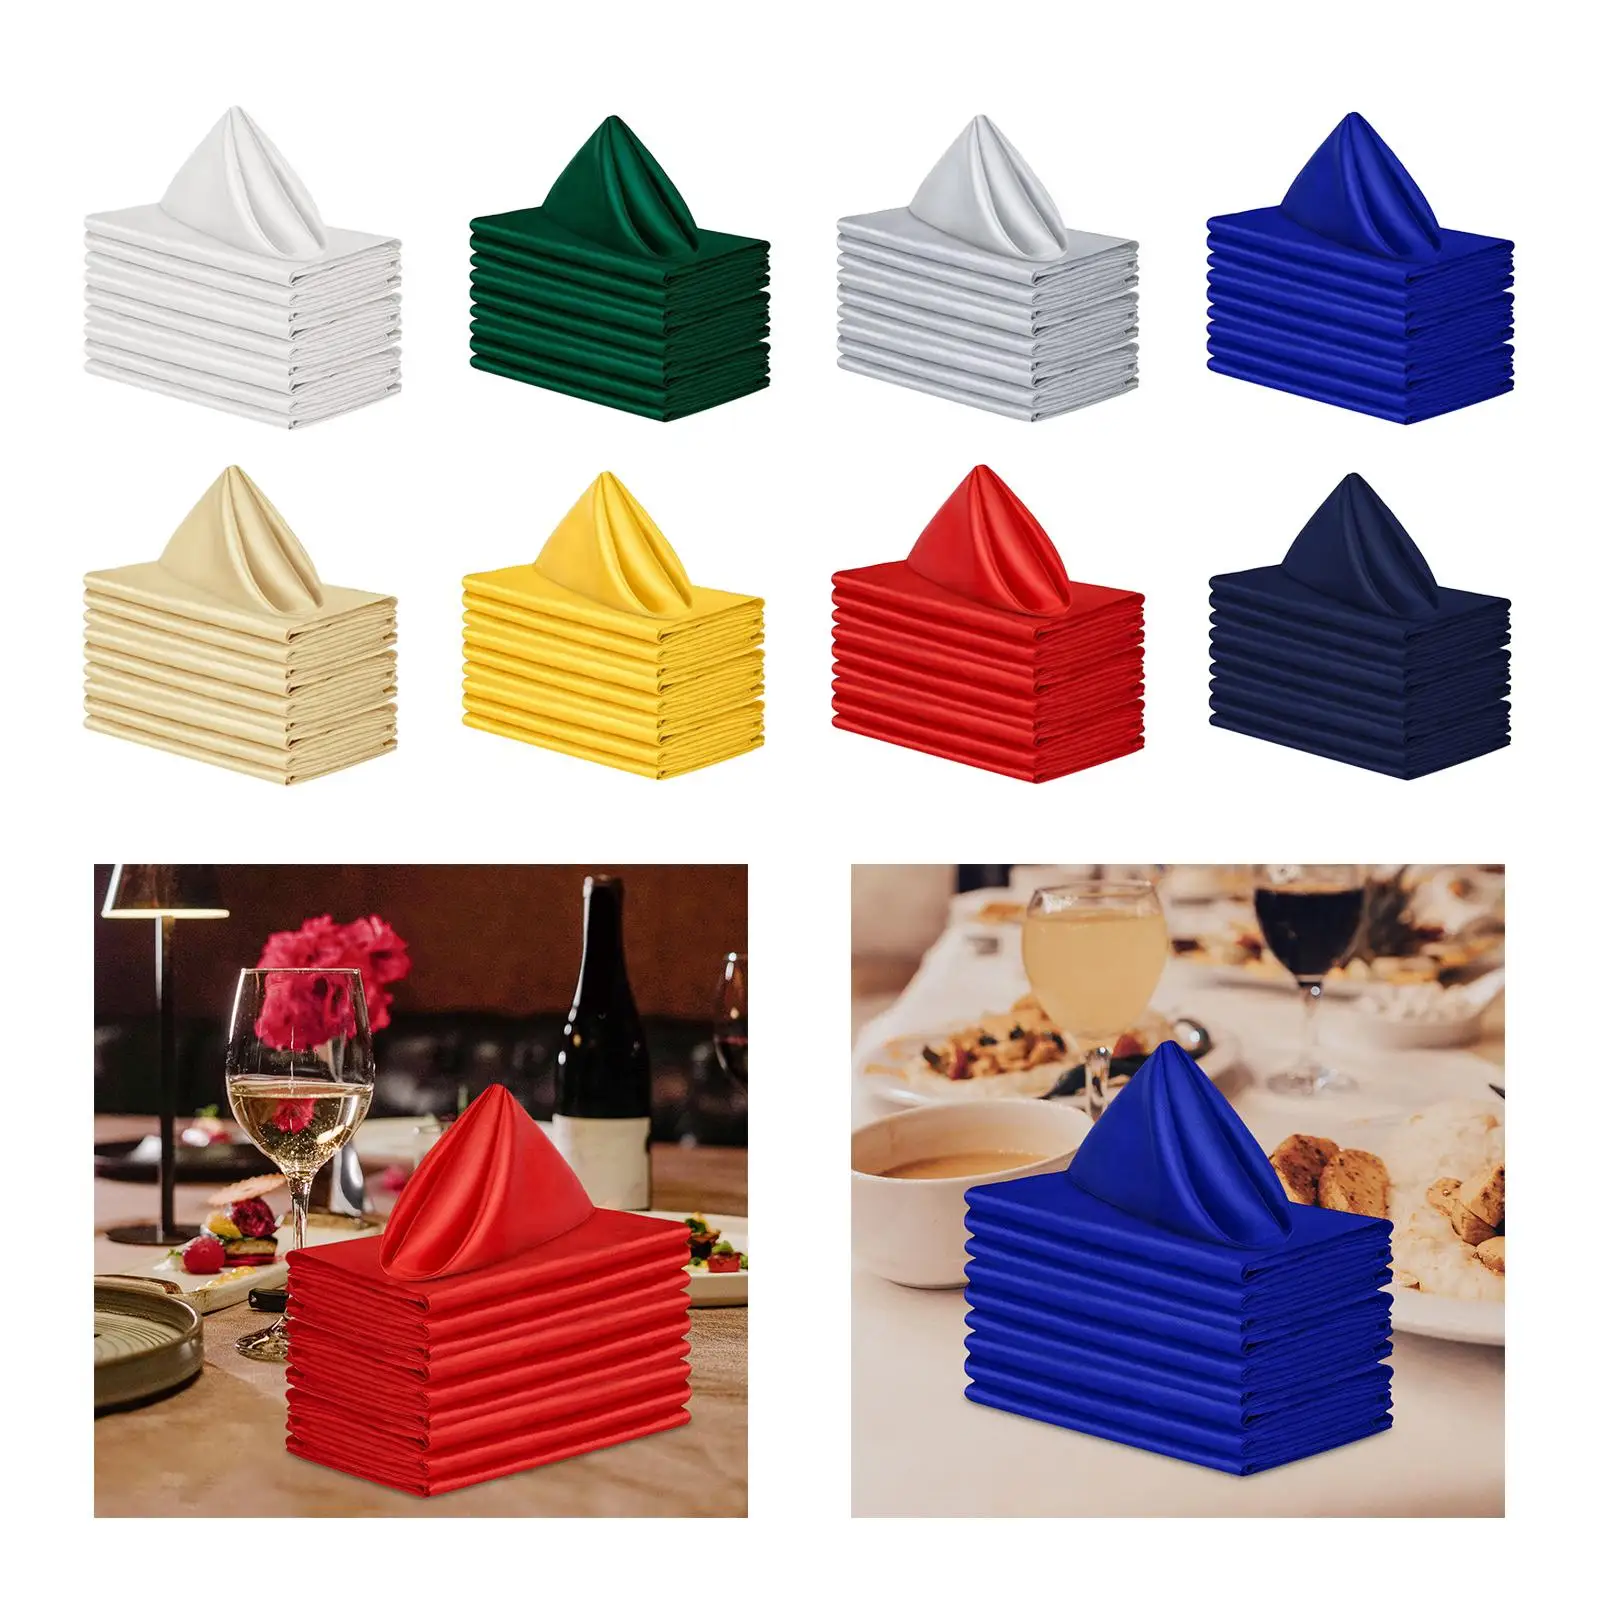 10Pcs Weddings Party Napkins 18.90Inchx18.90inch Reusable Elegant Satin Dinner Napkins for Weddings Parties Hotels Banquets